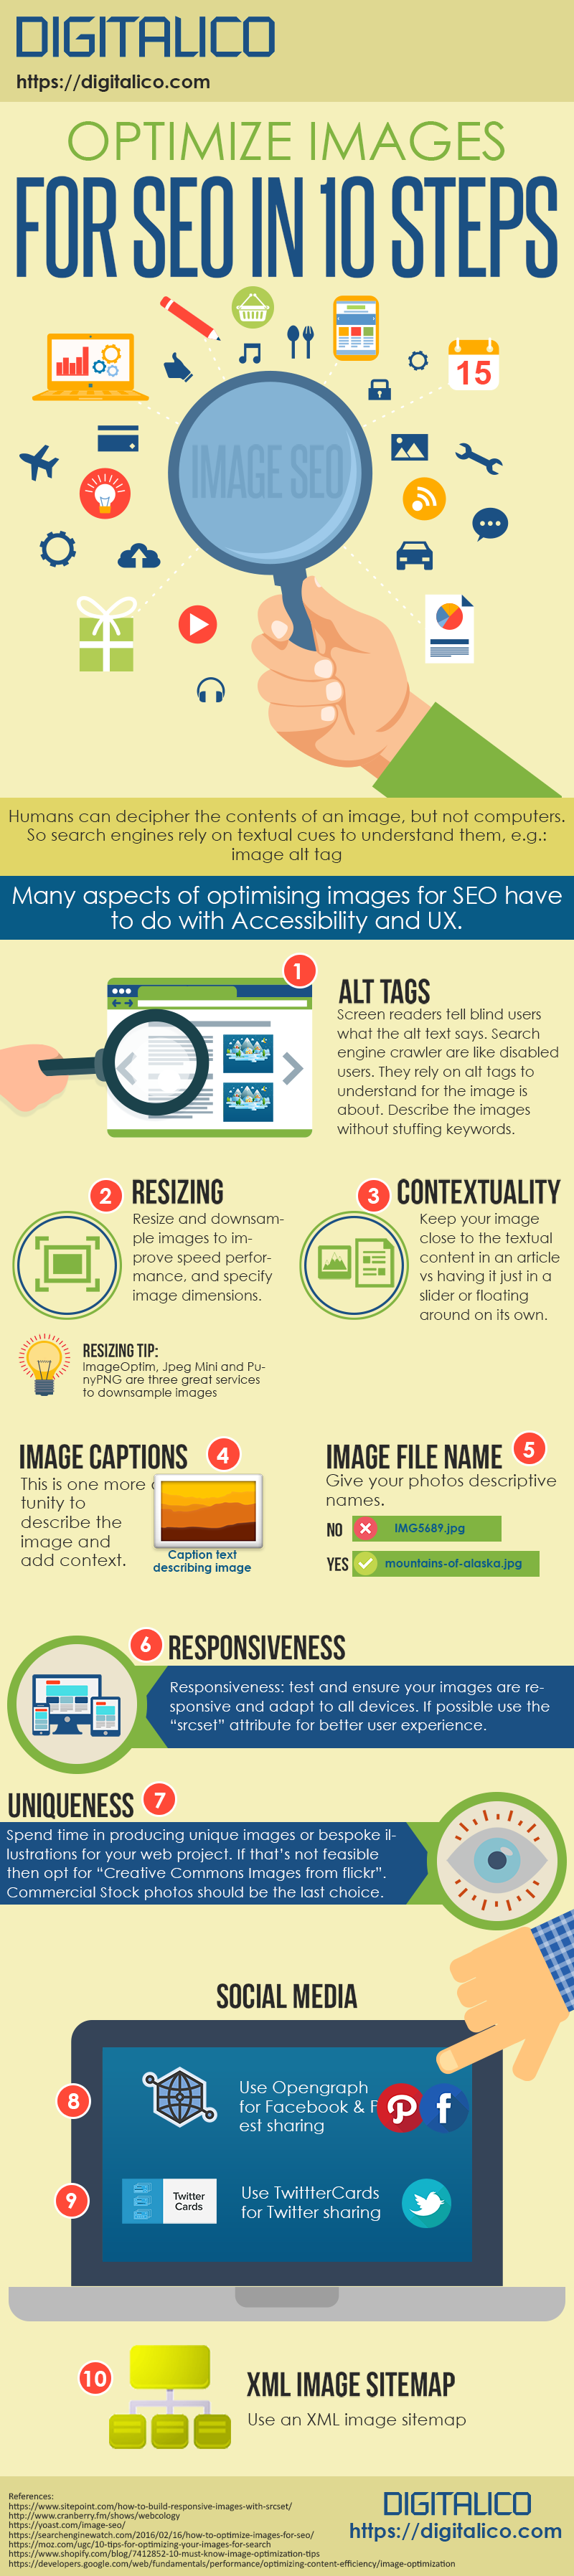 Digitalico infographic on how to optimize images for SEO in 10 steps